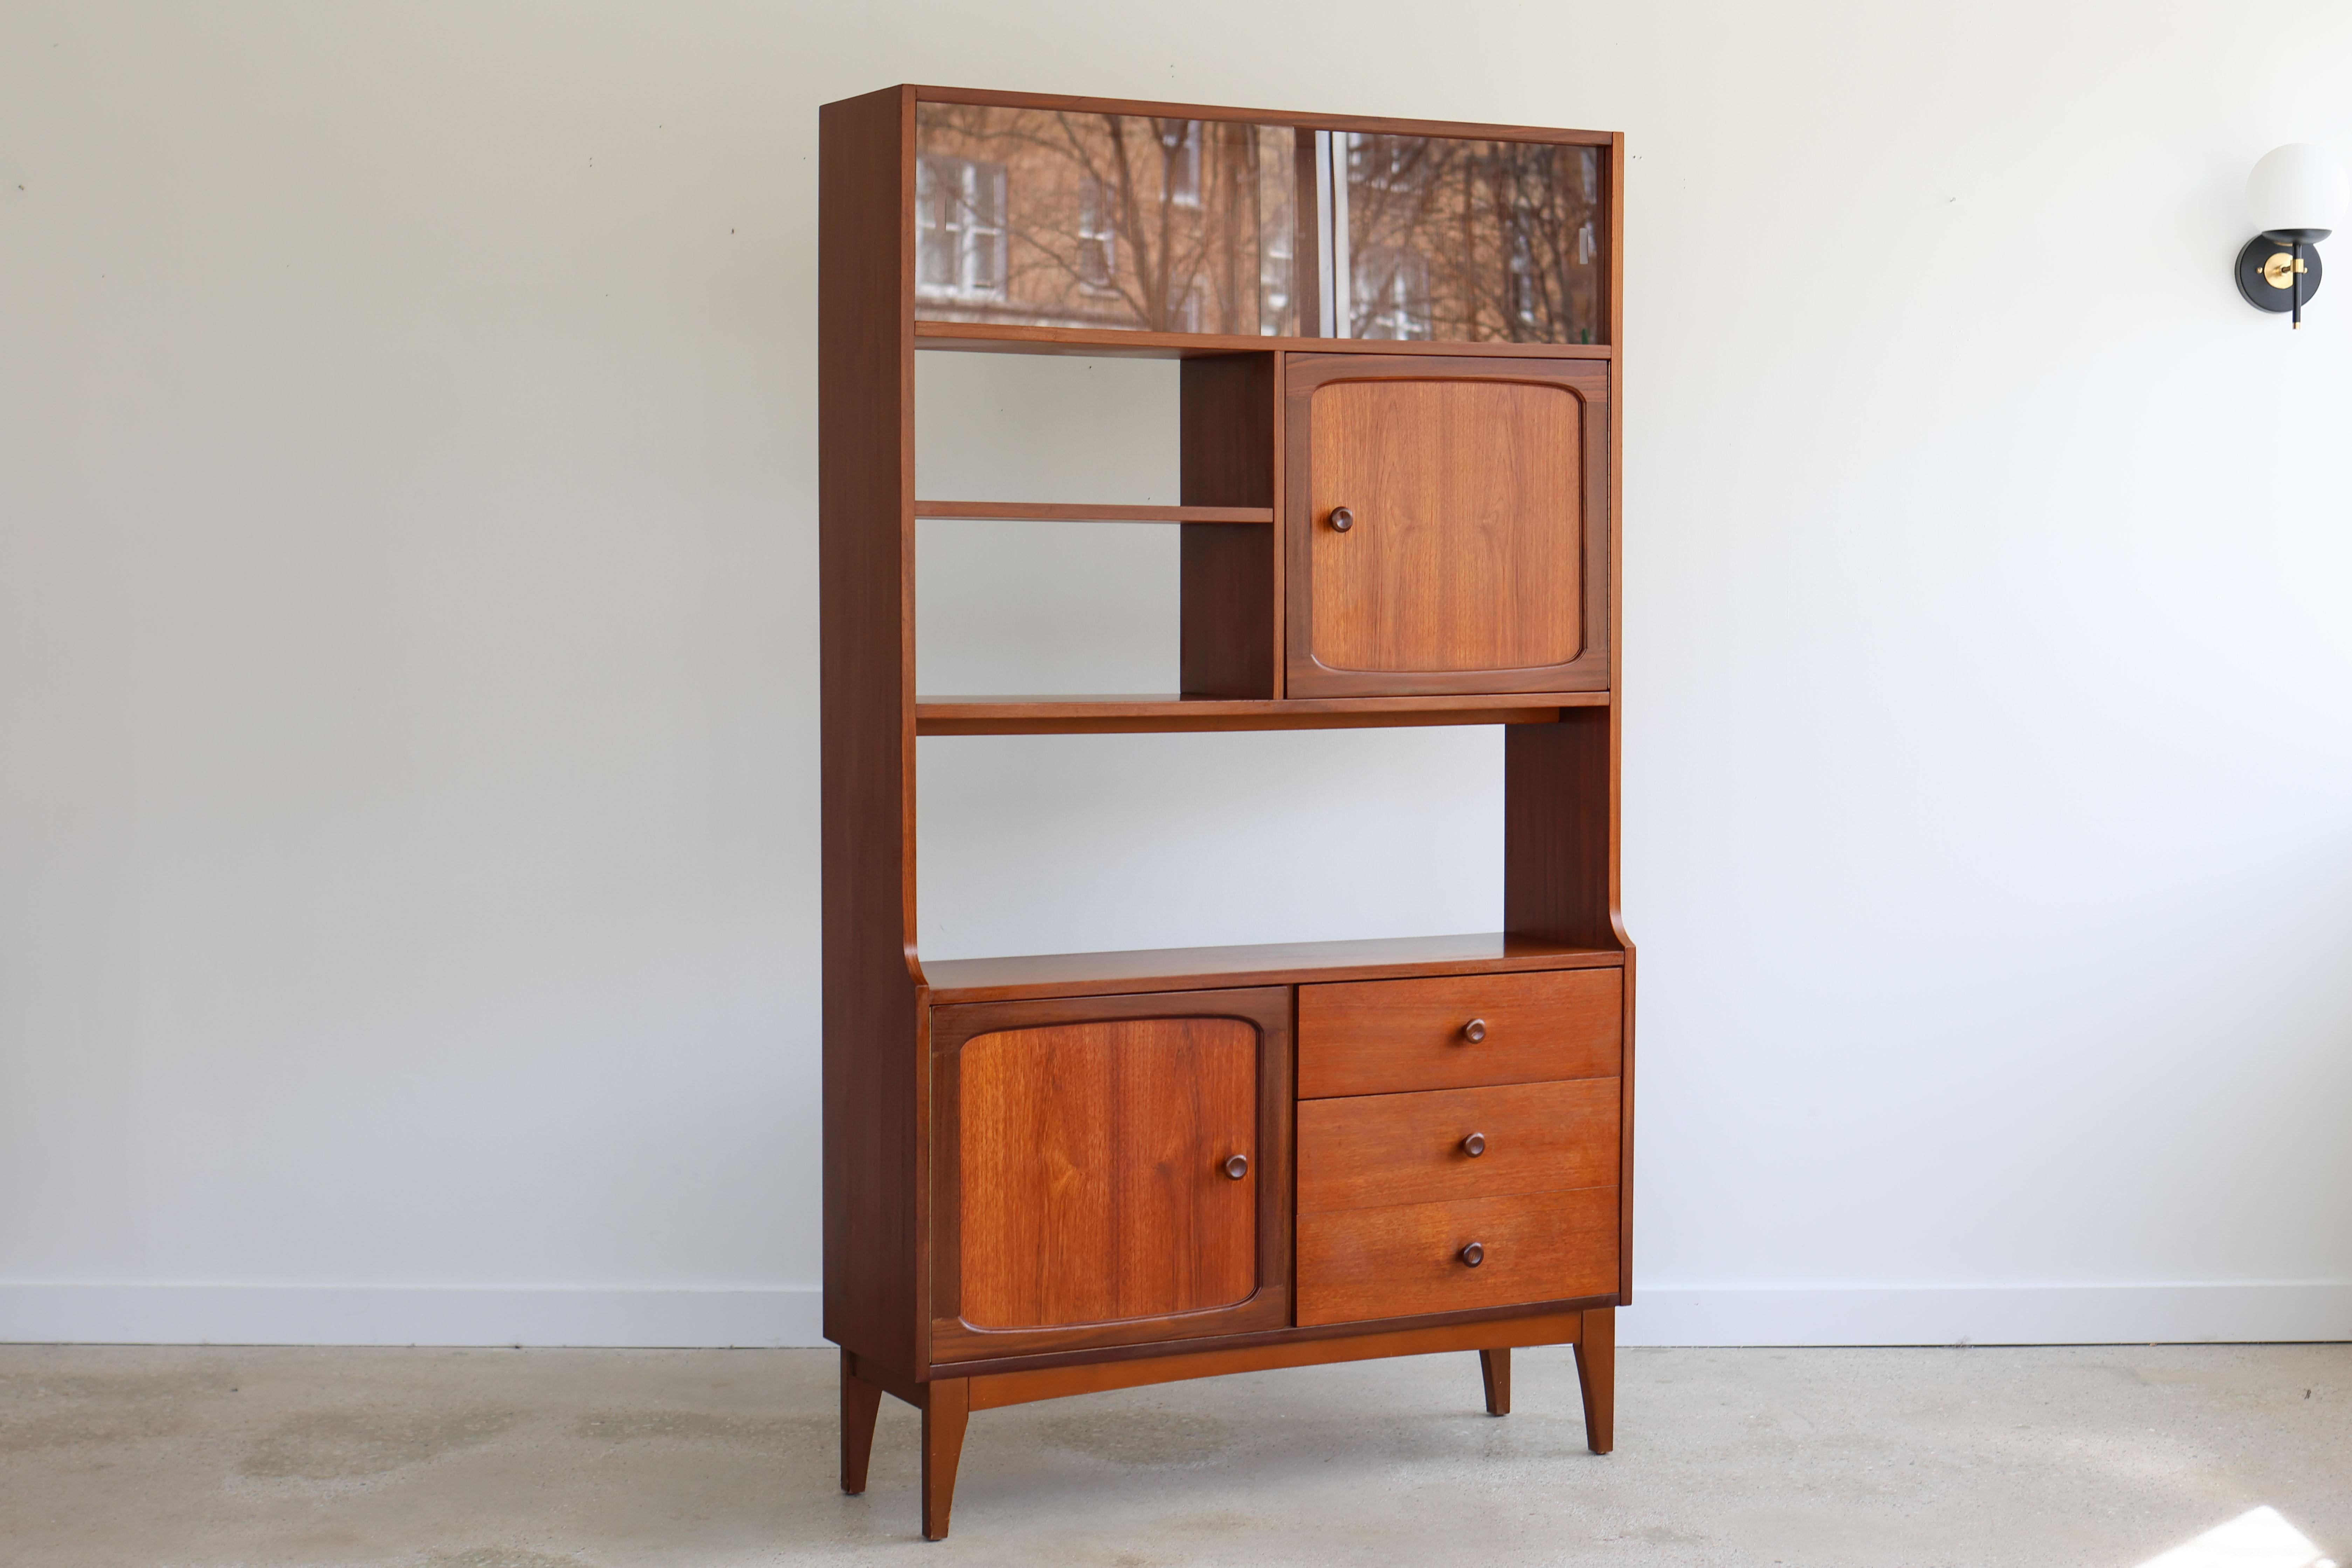 Mid-Century Danish Modern teak shelving unit.
Room divider by Stonehill, made in the UK, 1960s.
One piece narrow unit with finished back.
Two cabinets and three drawers.
Round wooden knobs.
Sliding glass panels on the top for enclosed display